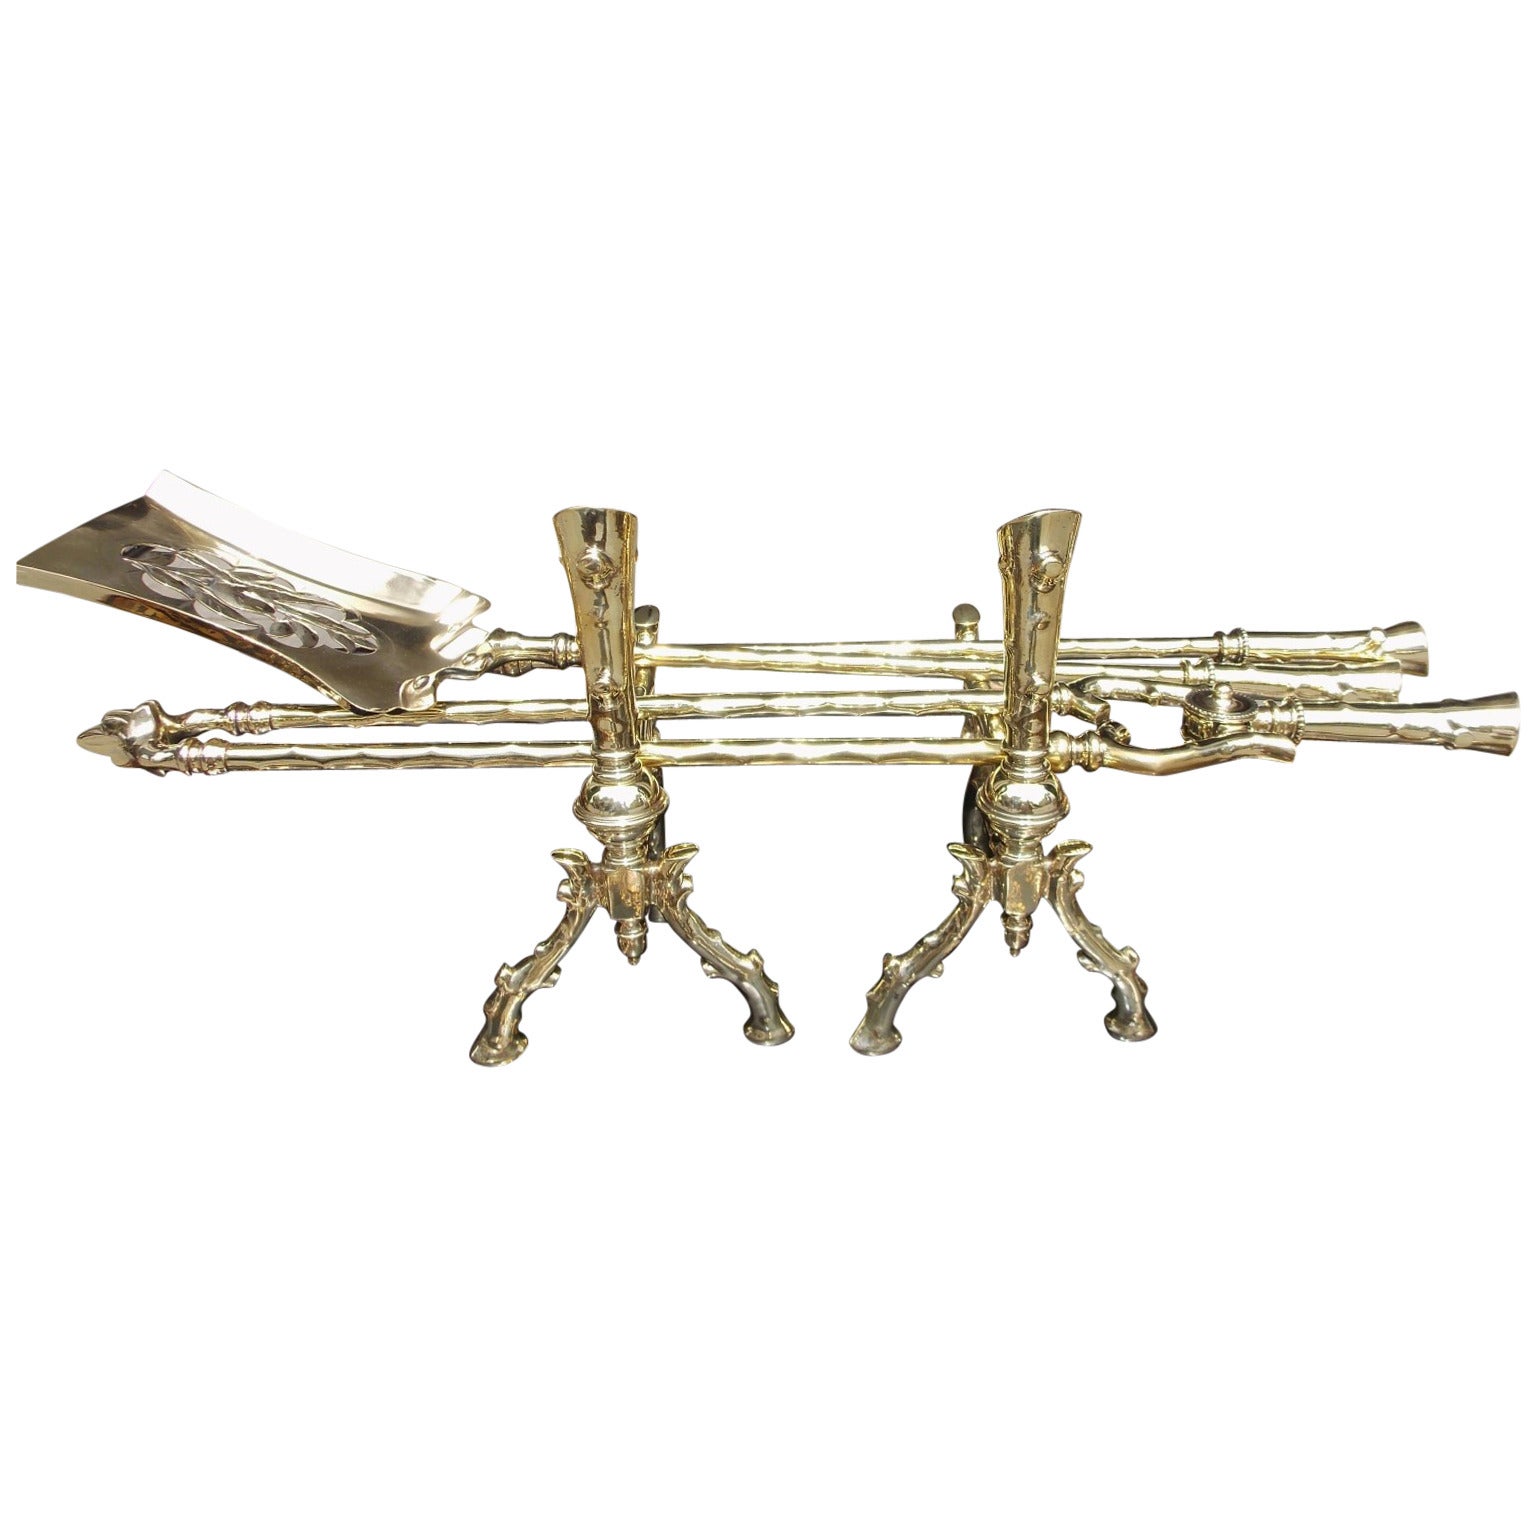 Set of American Brass Fire Tools on Matching Creepers, Circa 1850